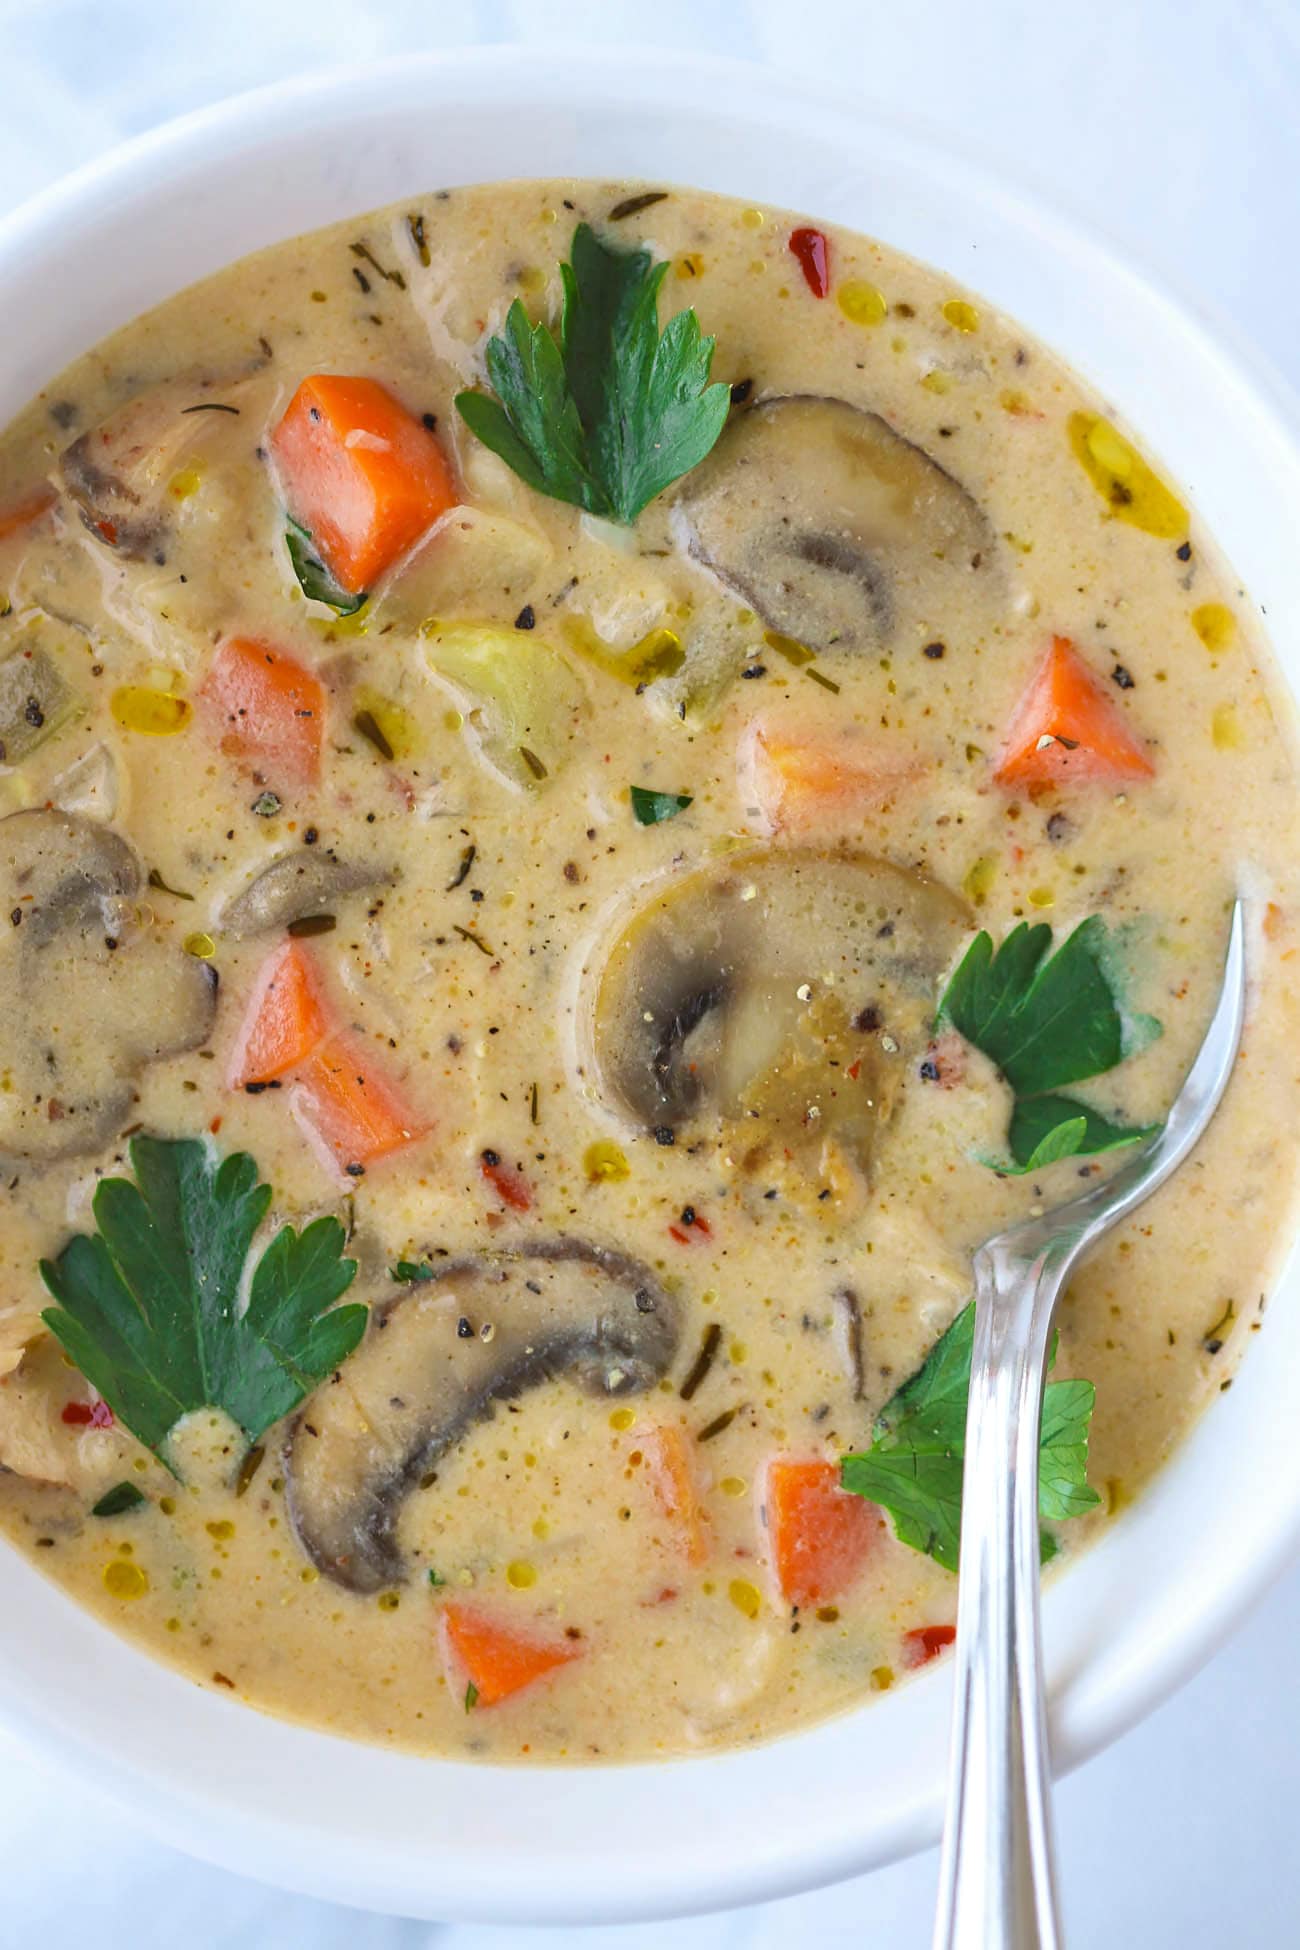 Featured image for “Chicken, Mushroom and Rice Soup”